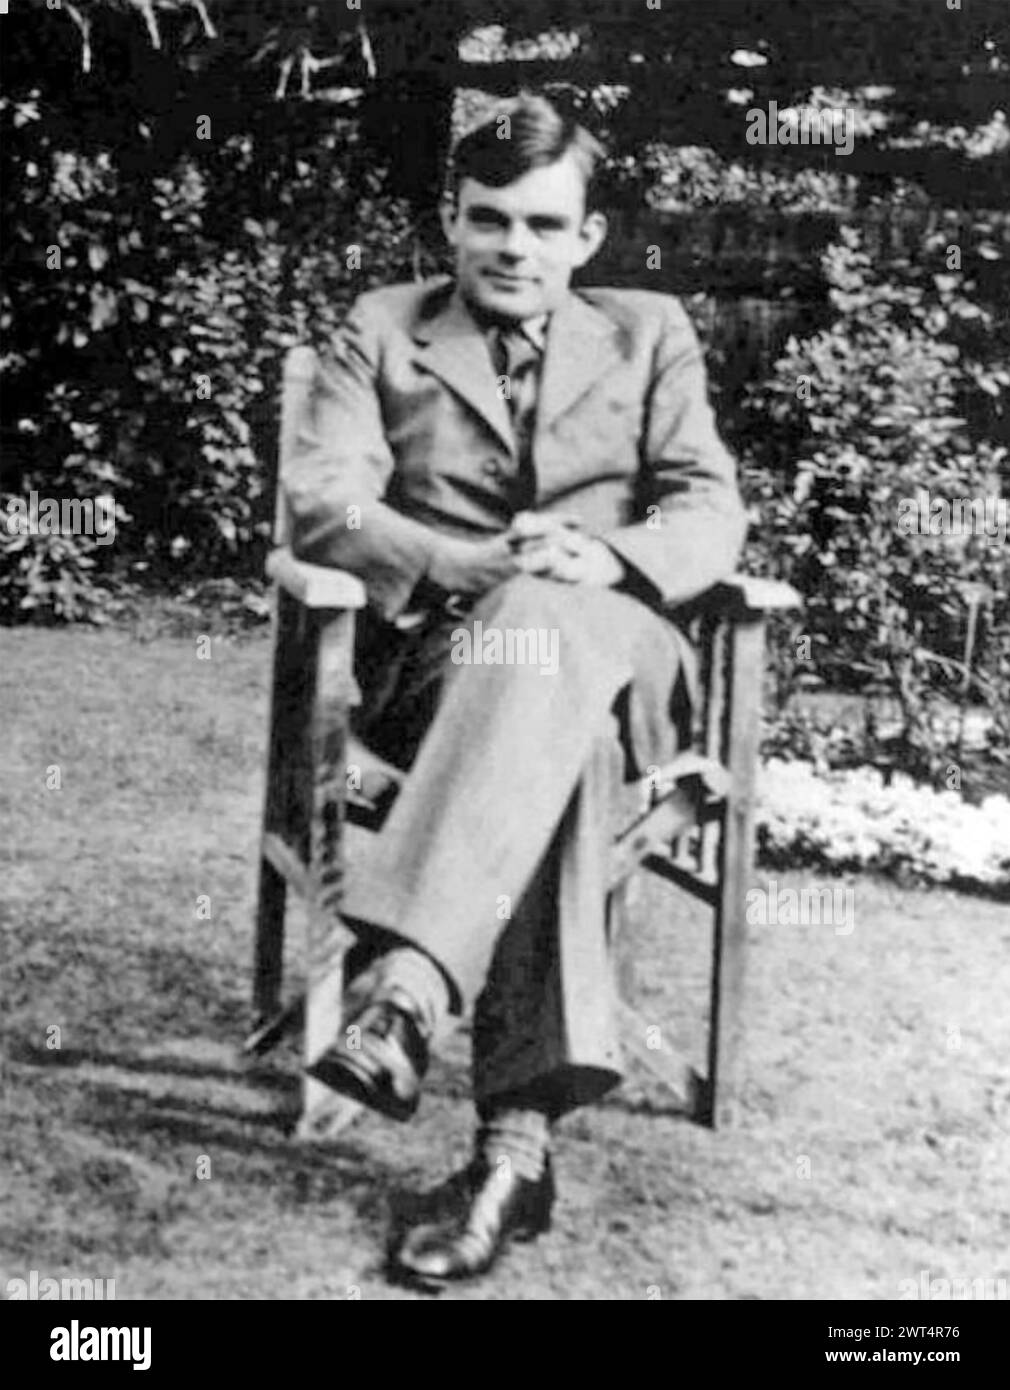 ALAN TURING (1912-1954) English mathematician and computer scientist about 1930 Stock Photo